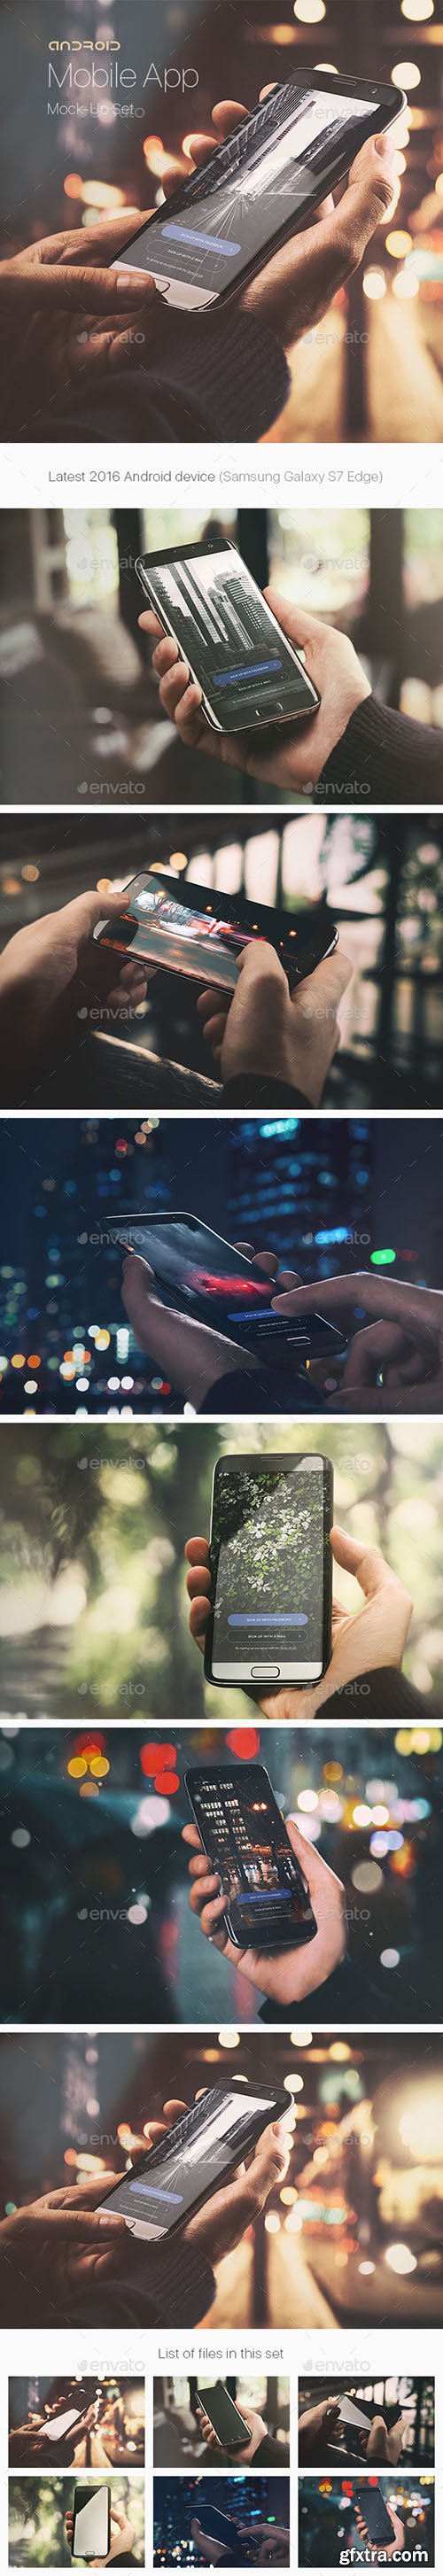 Graphicriver Android Phone App Mock-Up / Urban Edition 15430507